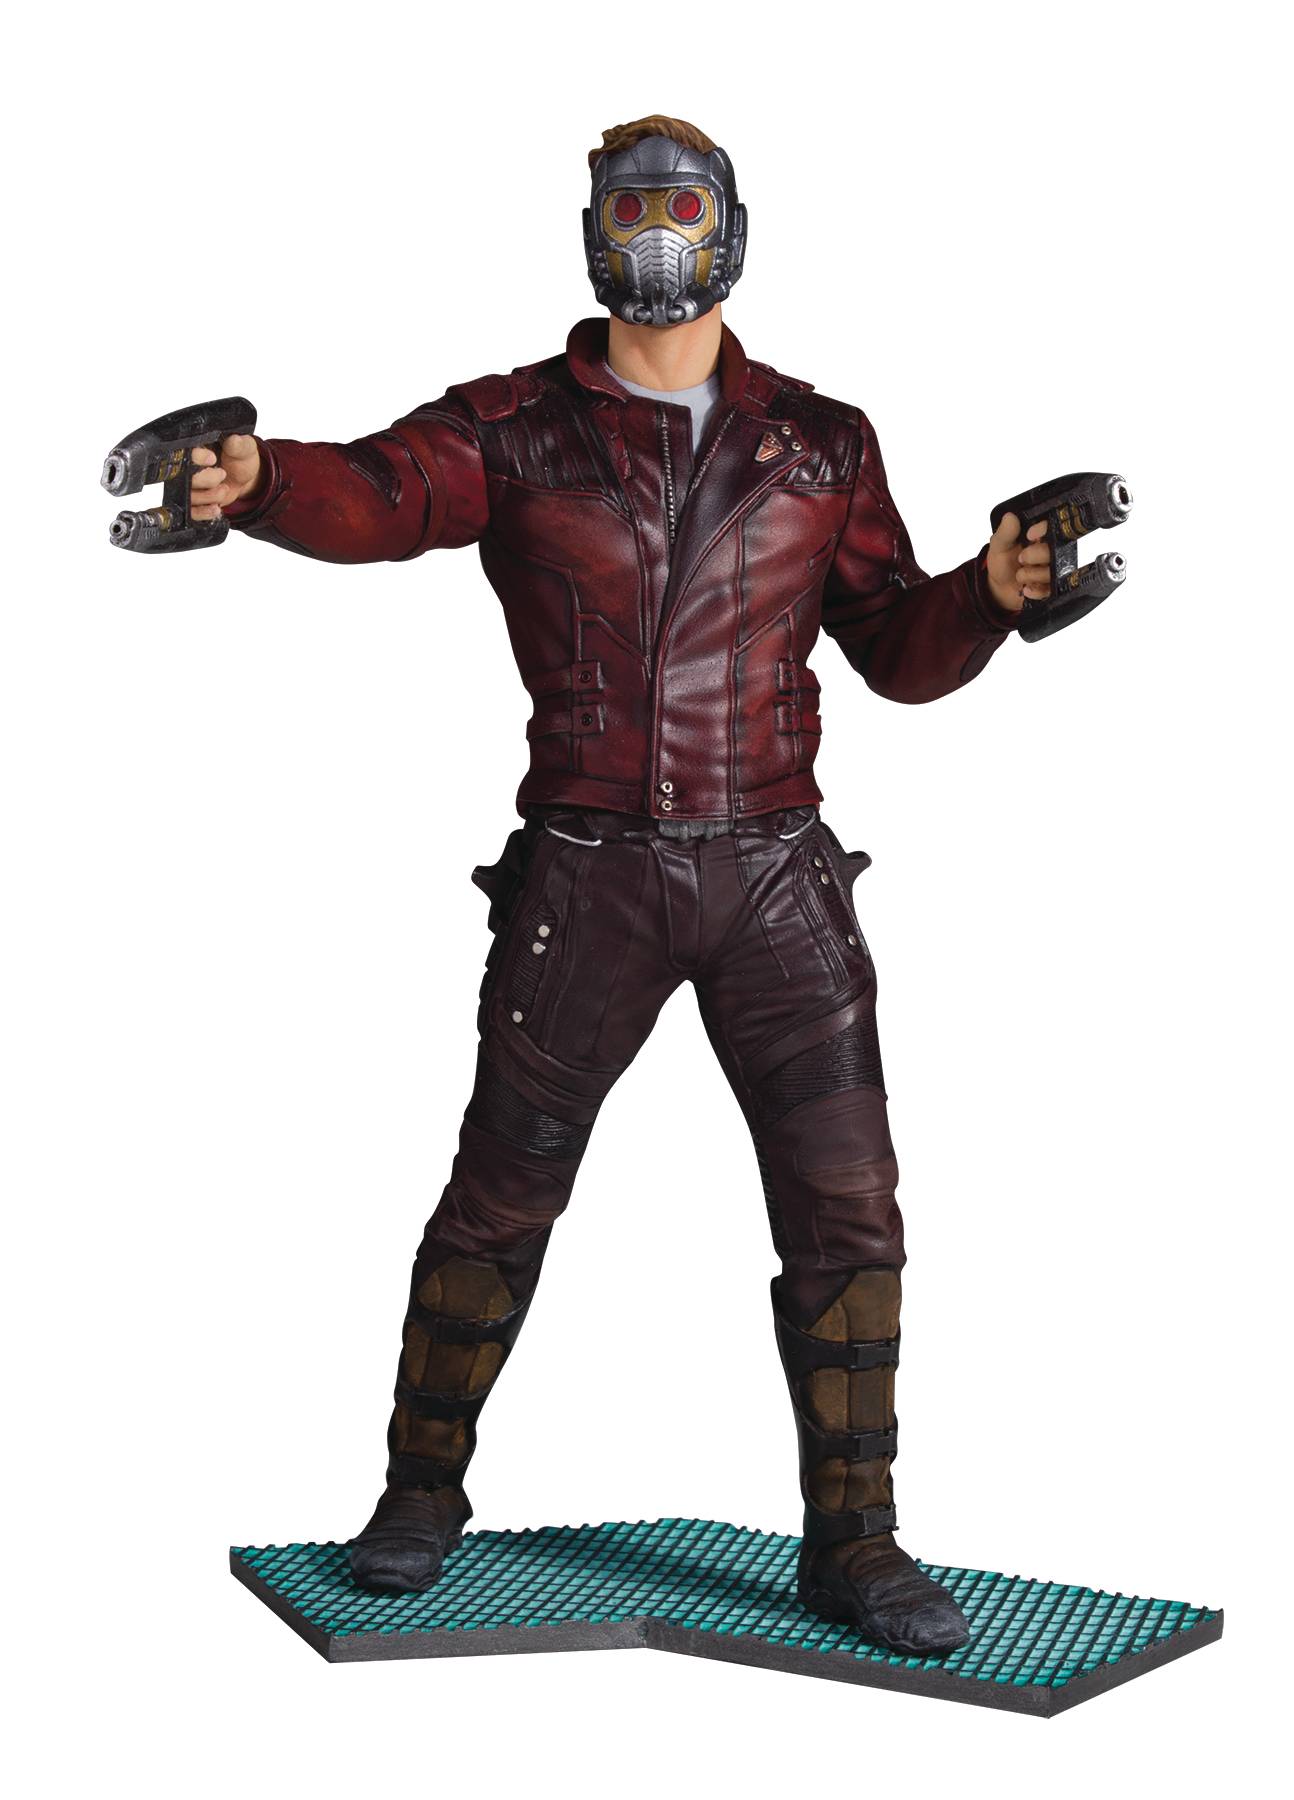 Marvel Guardians of the Galaxy 2 Star-Lord Collectors Gallery Statue